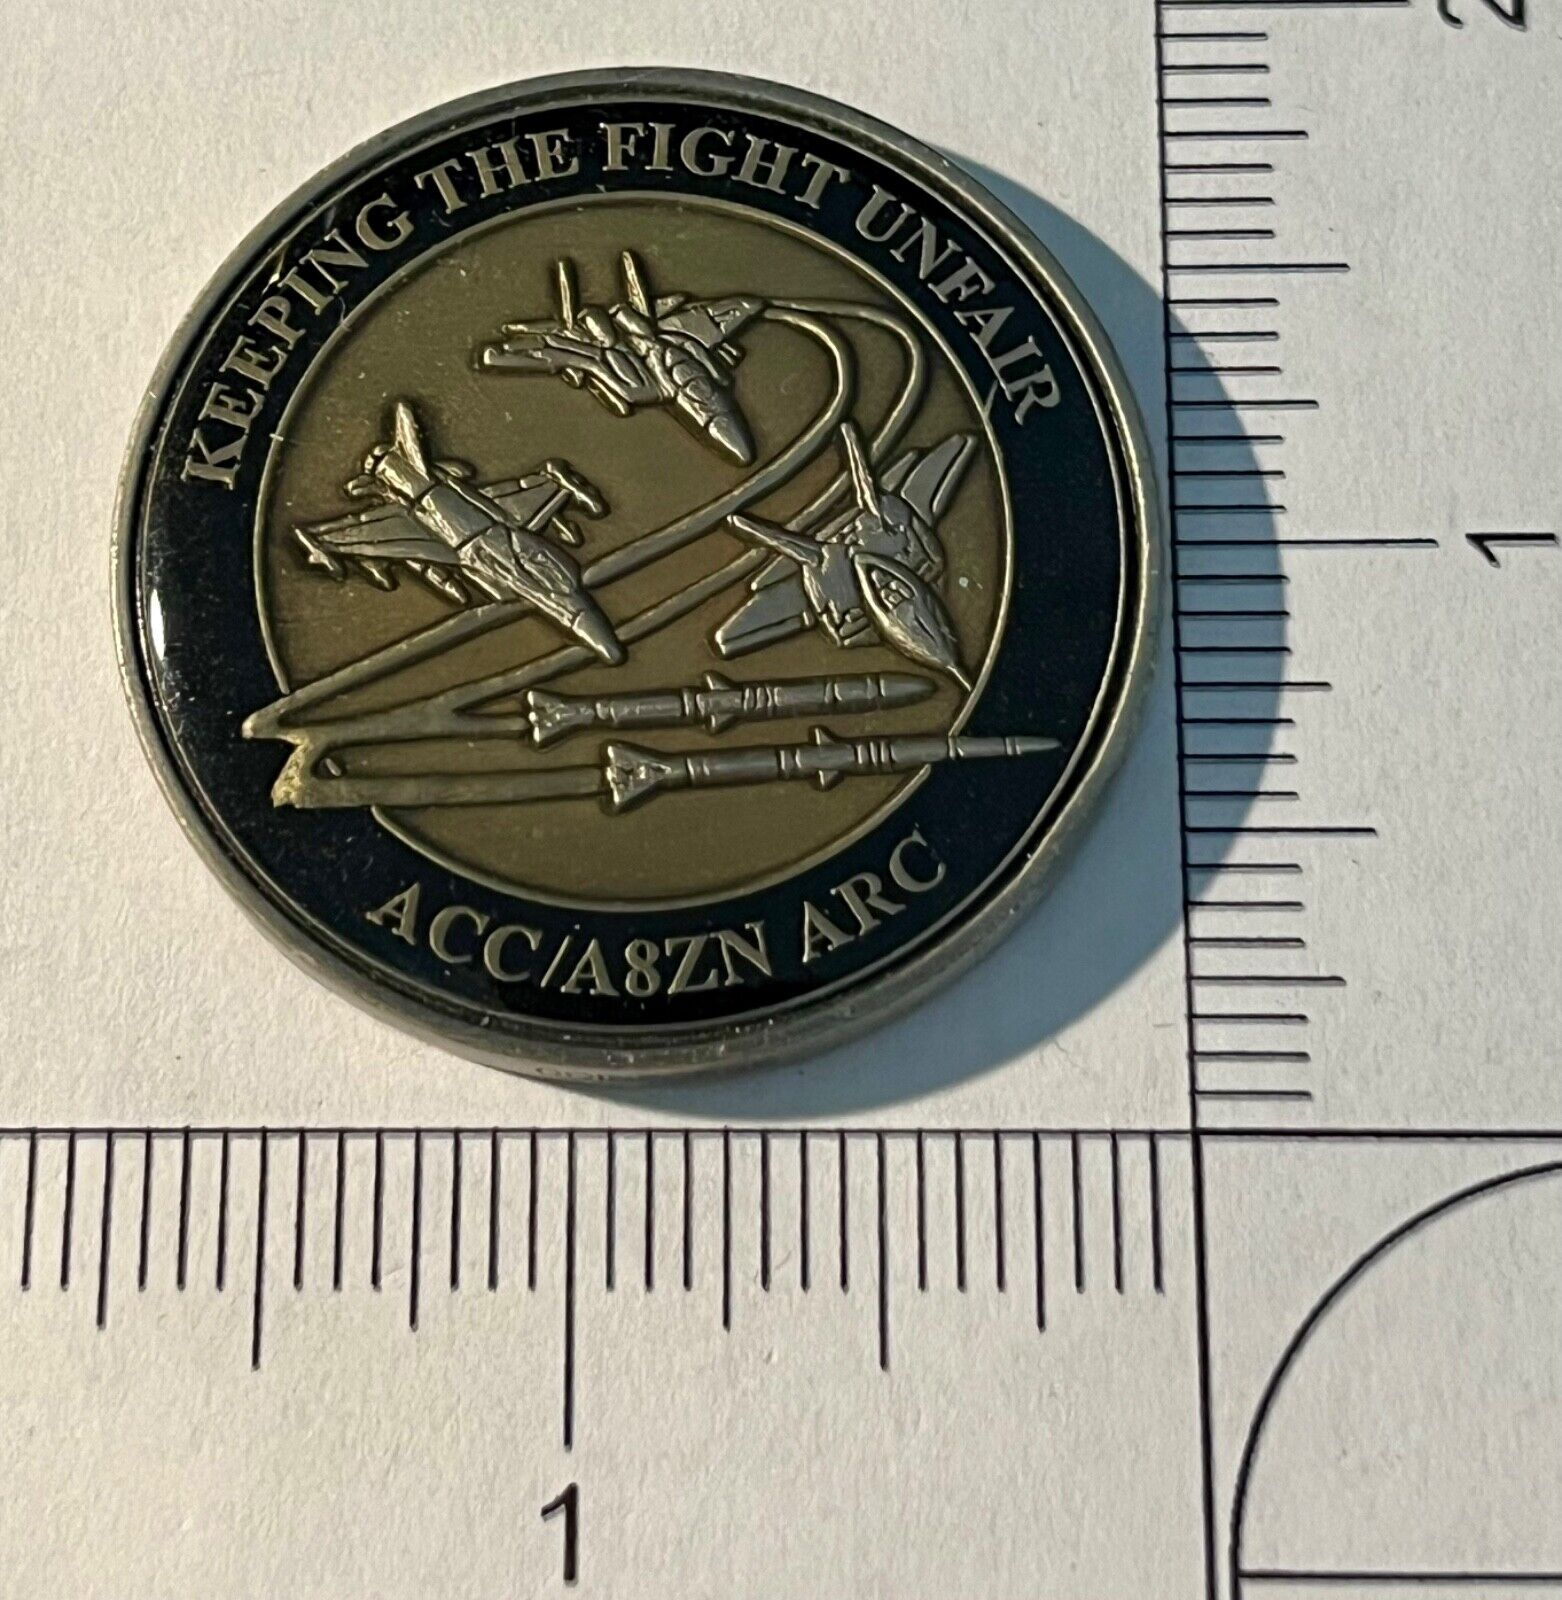 Rare USAF ACC/A8ZN Air Reserve Component Challenge Coin